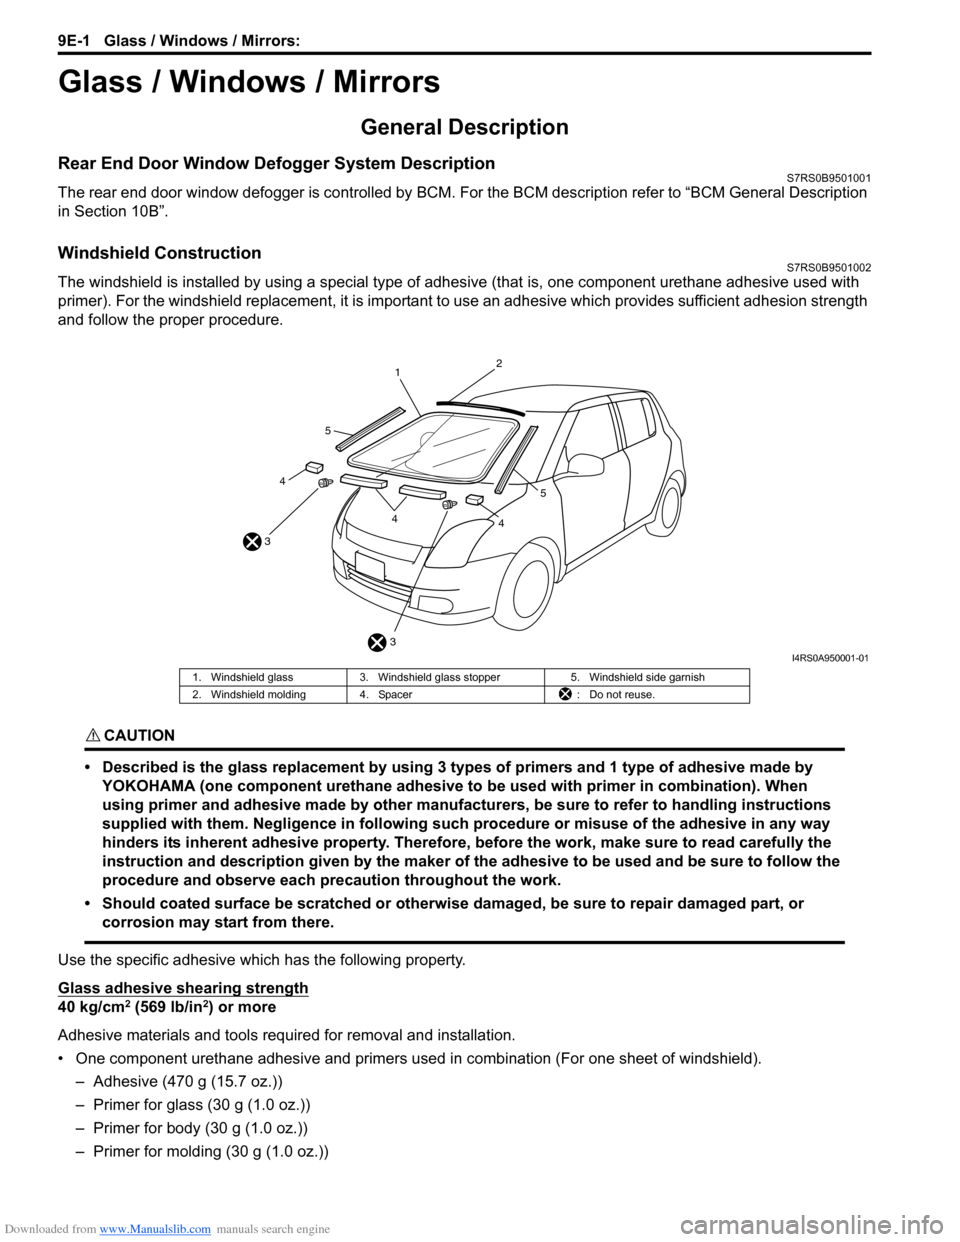 SUZUKI SWIFT 2008 2.G Service Workshop Manual Downloaded from www.Manualslib.com manuals search engine 9E-1 Glass / Windows / Mirrors: 
Body, Cab and Accessories
Glass / Windows / Mirrors
General Description
Rear End Door Window Defogger System D